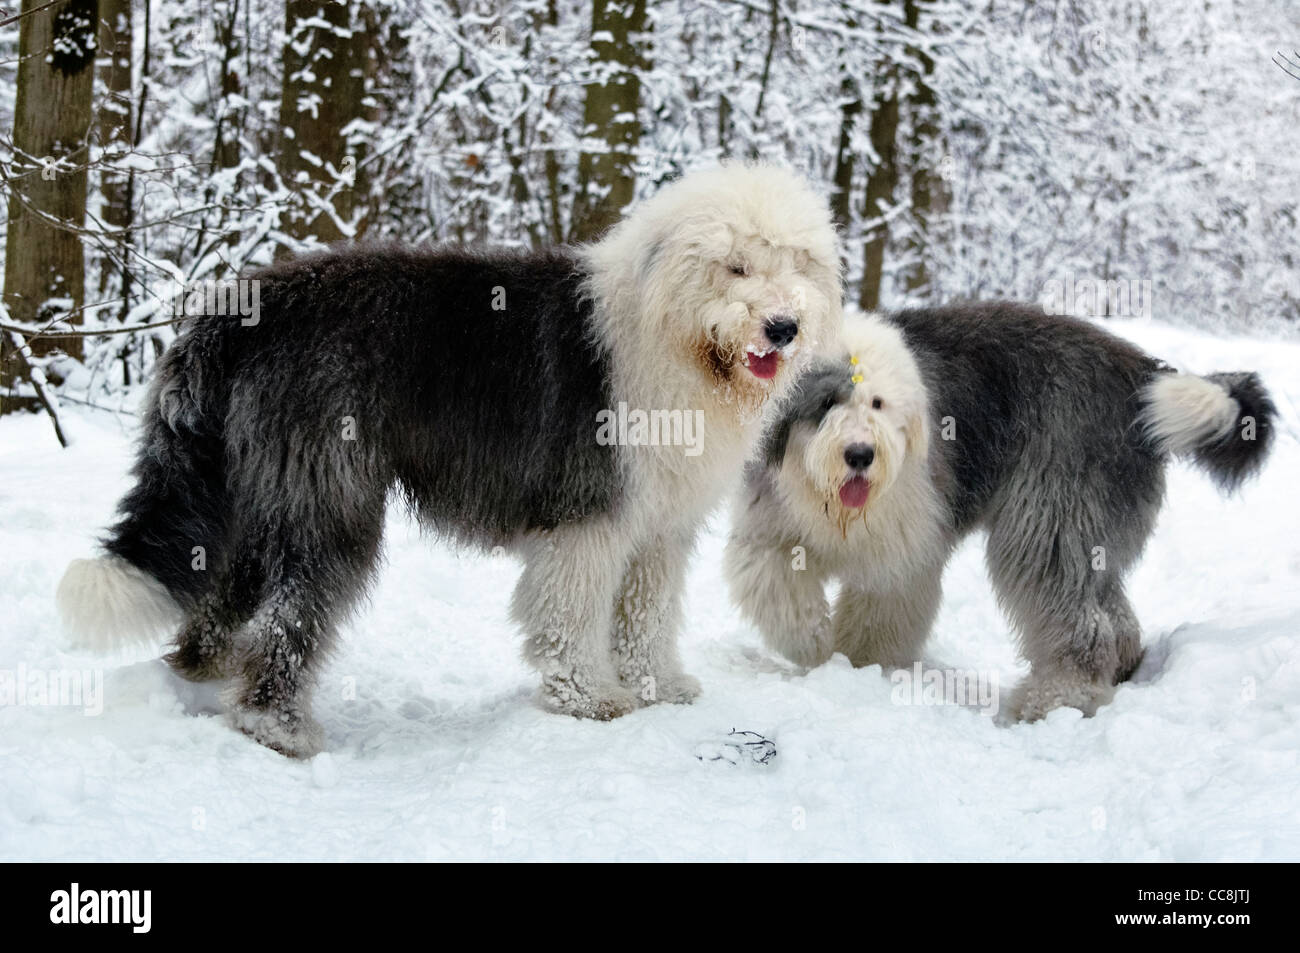 Puppy Of Old English Sheepdog In Snowy Field Stock Photo, Picture and  Royalty Free Image. Image 11977457.